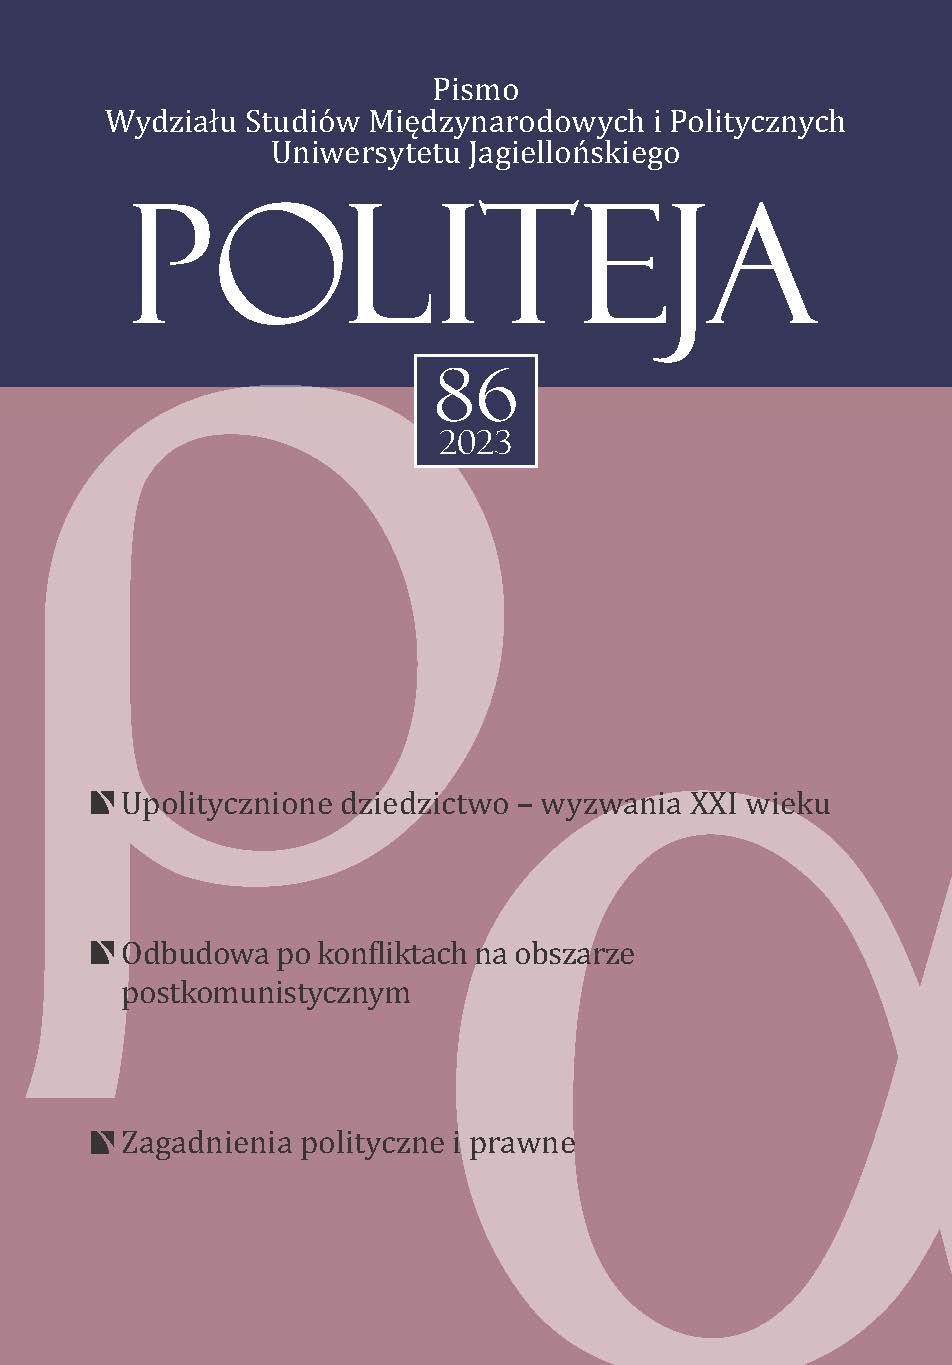 Protest  as  a  Form  of  Civic  Movement  in  Post-Conflict  Society  with  the  Example of the Republic of Serbia Cover Image